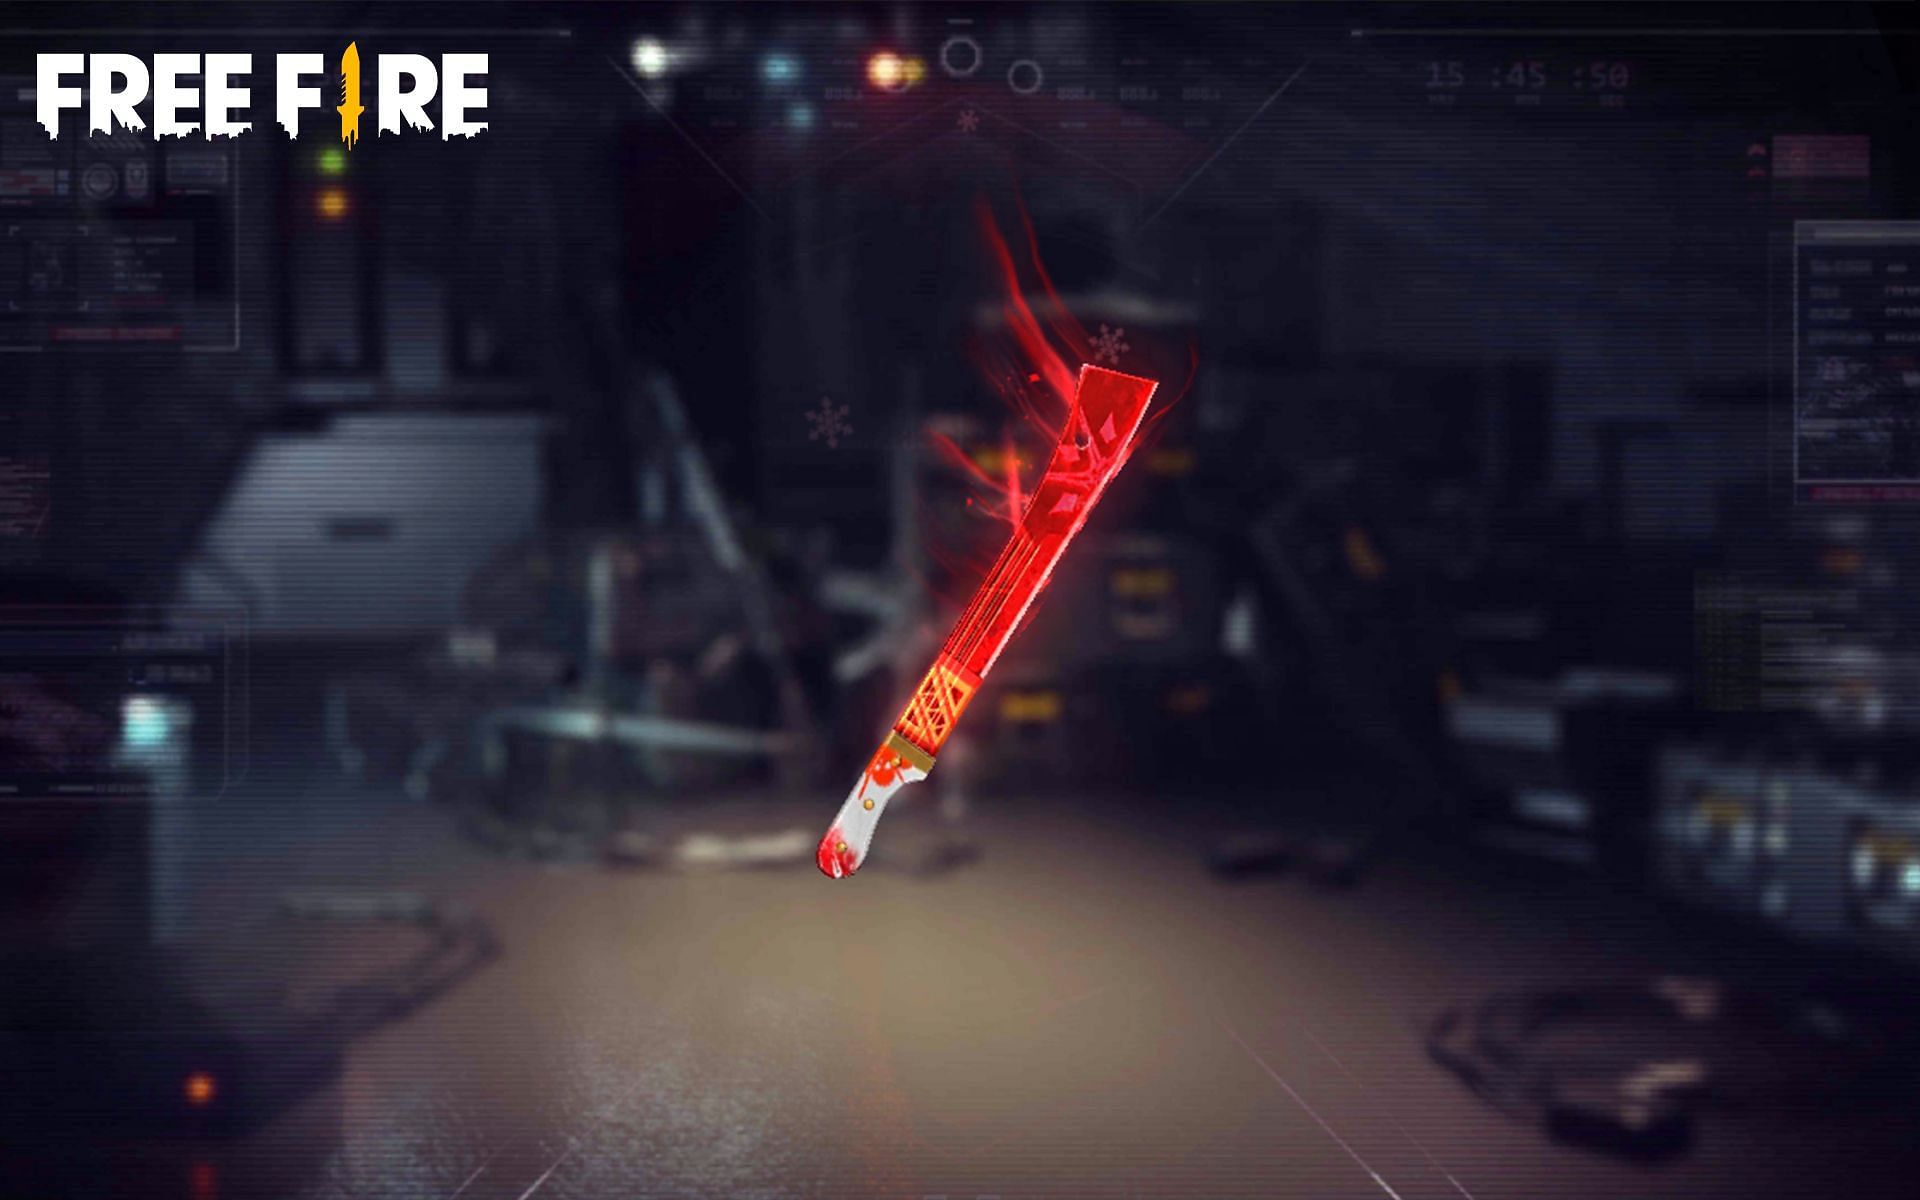 Snow Slicer Machete is attainable for free (Image via Free Fire)